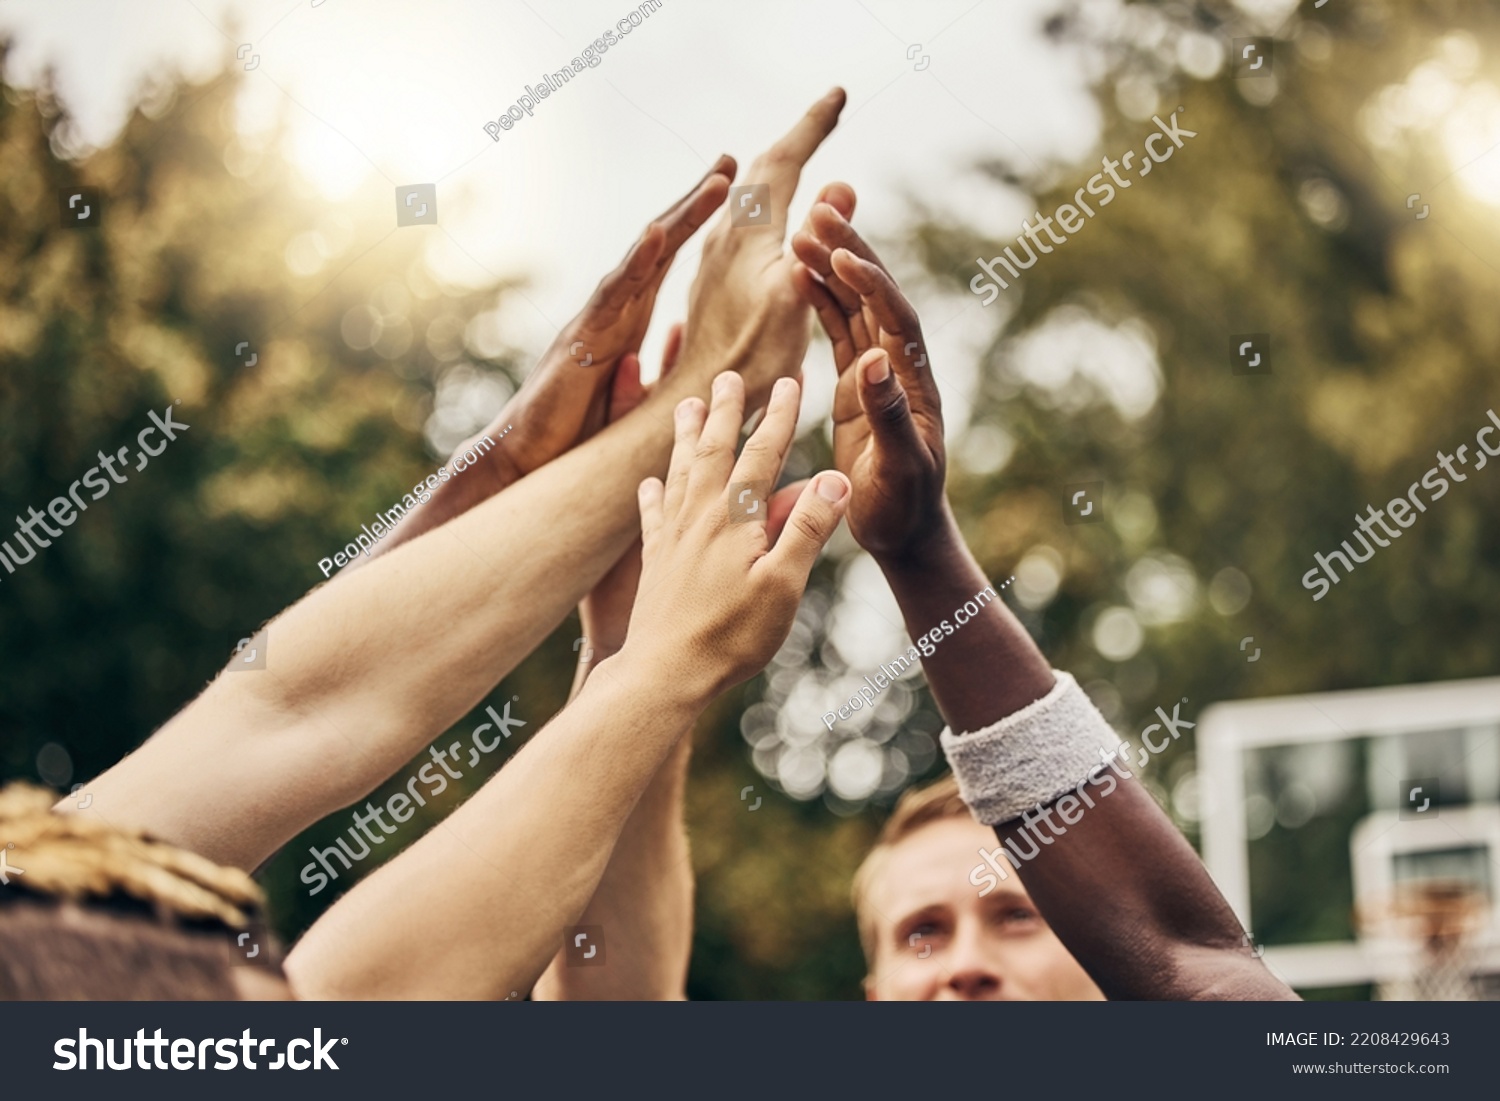 Basketball, winner and hands, team high five for outdoor game. Success, diversity and victory goal for sports for men. Teamwork, diversity and support, friends on basketball court together with coach #2208429643